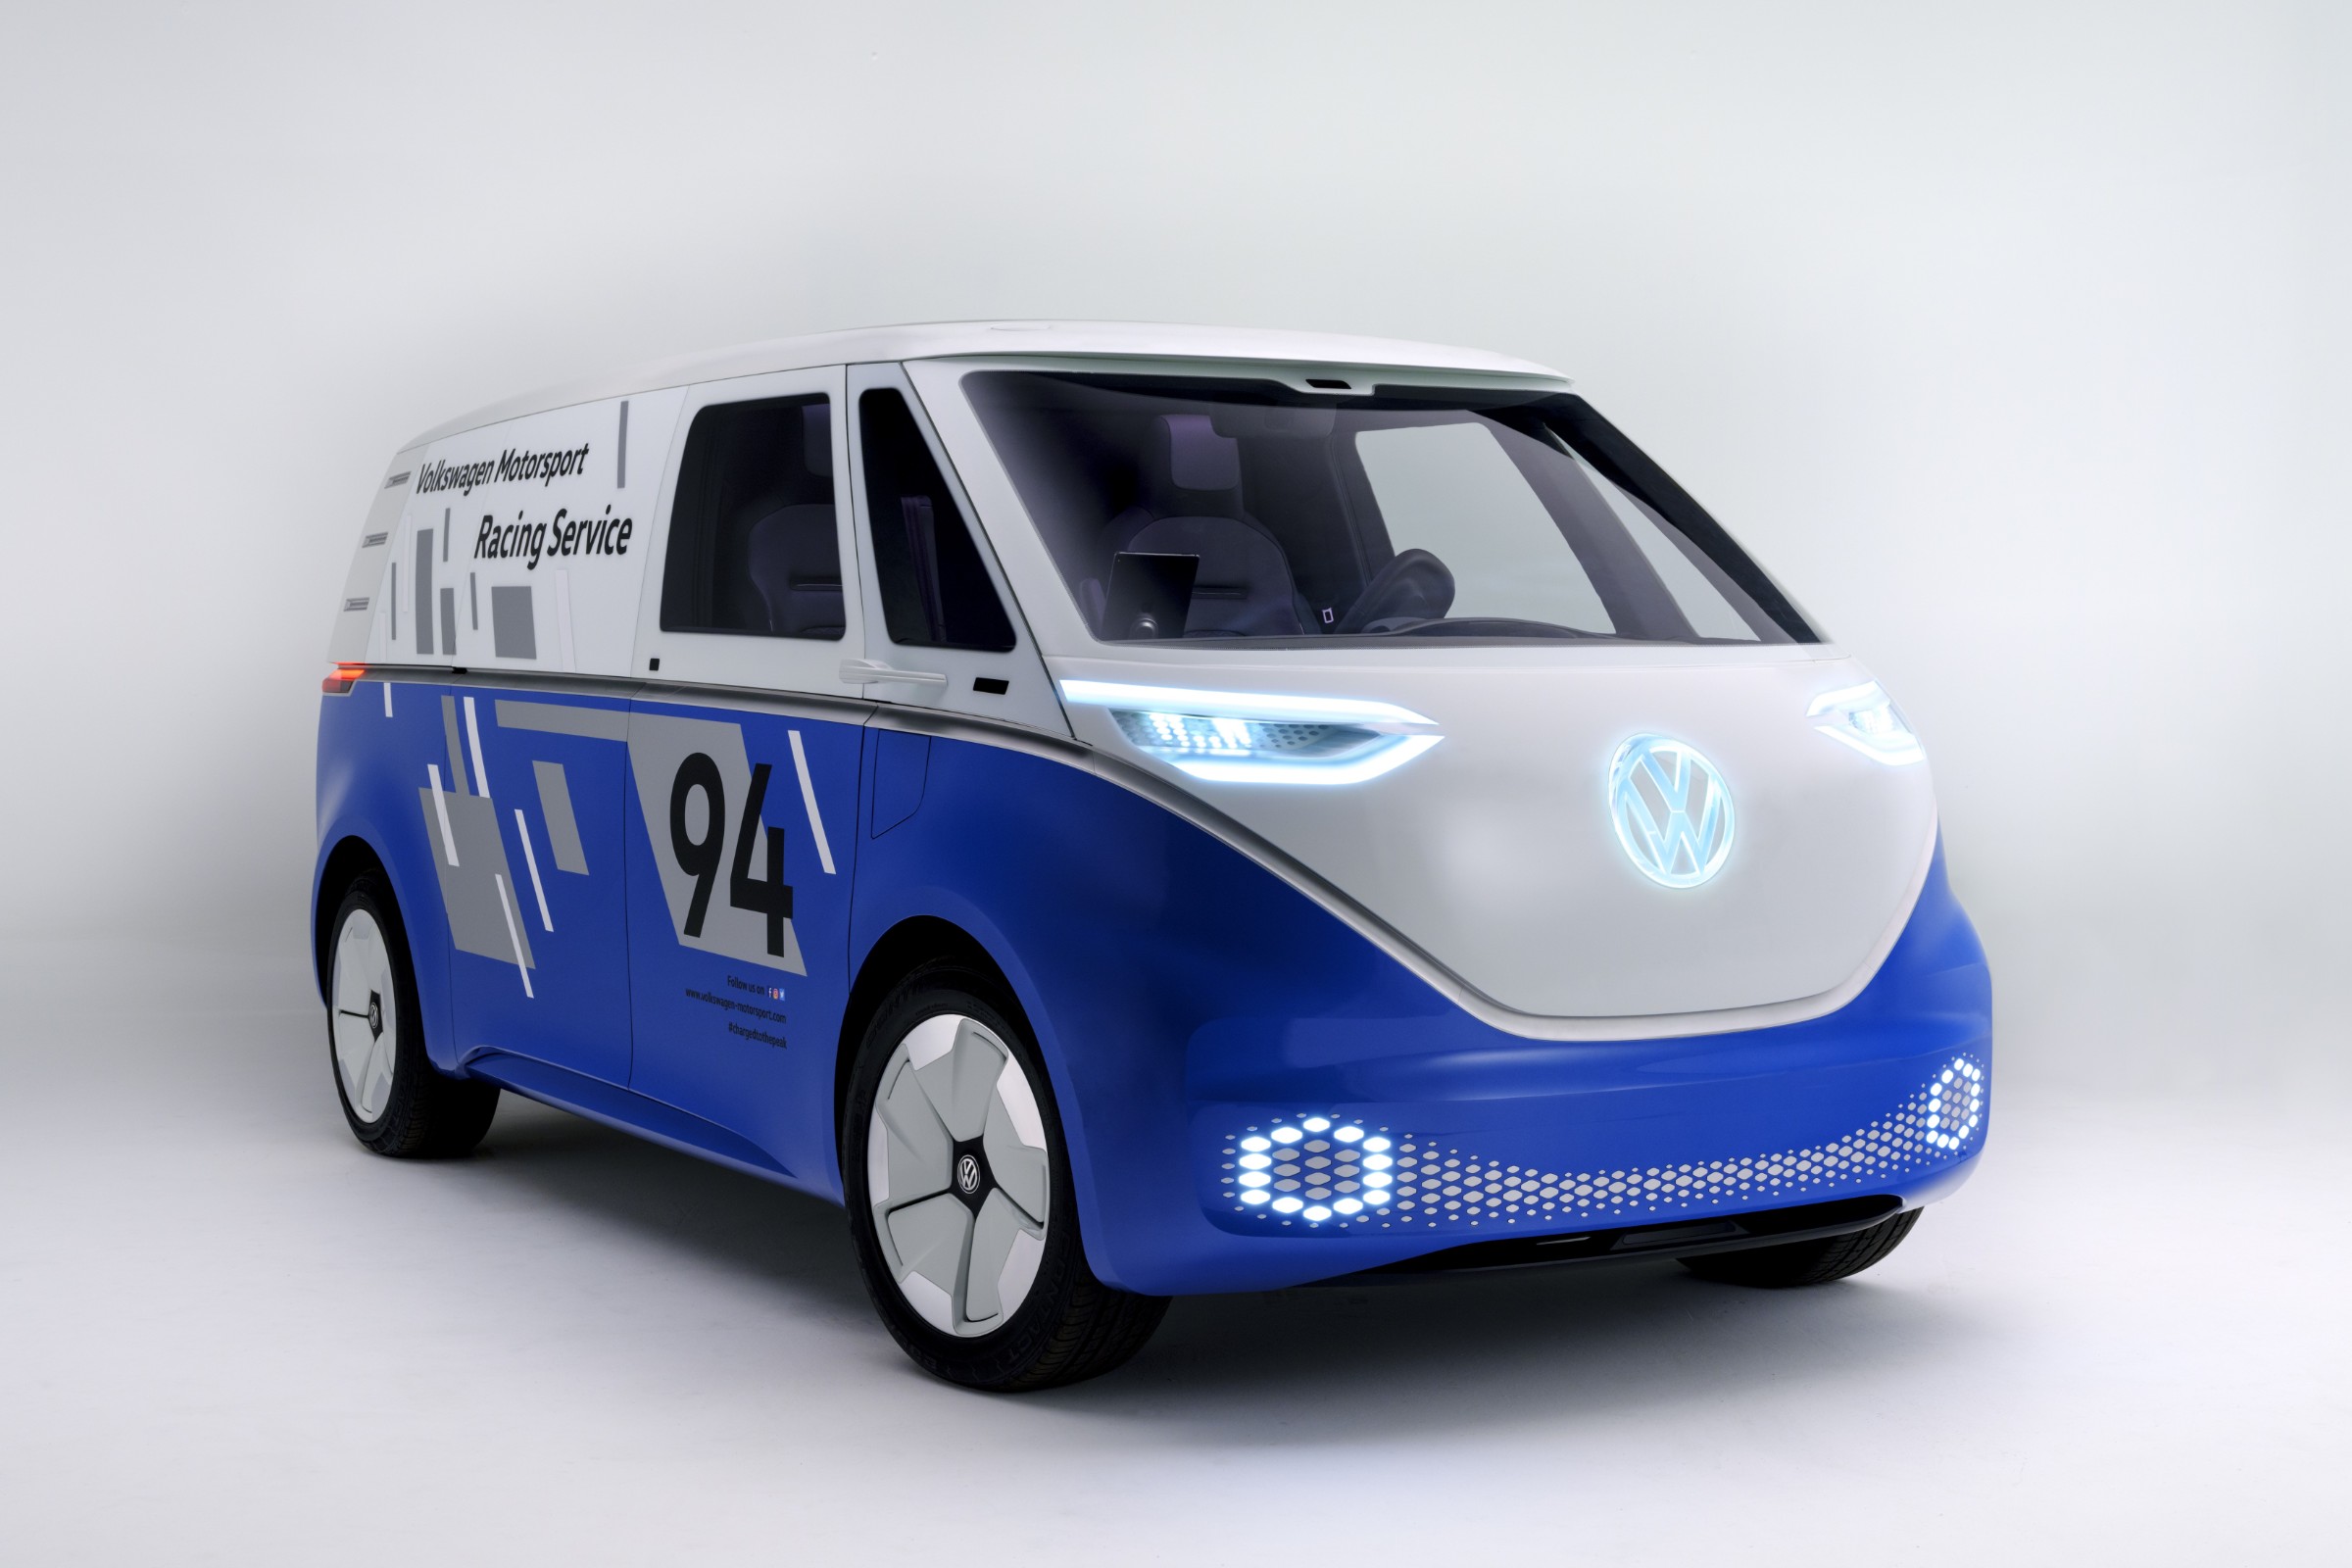 Volkswagen Says Next Gen Fossil Fuel Vehicles to be Their Last